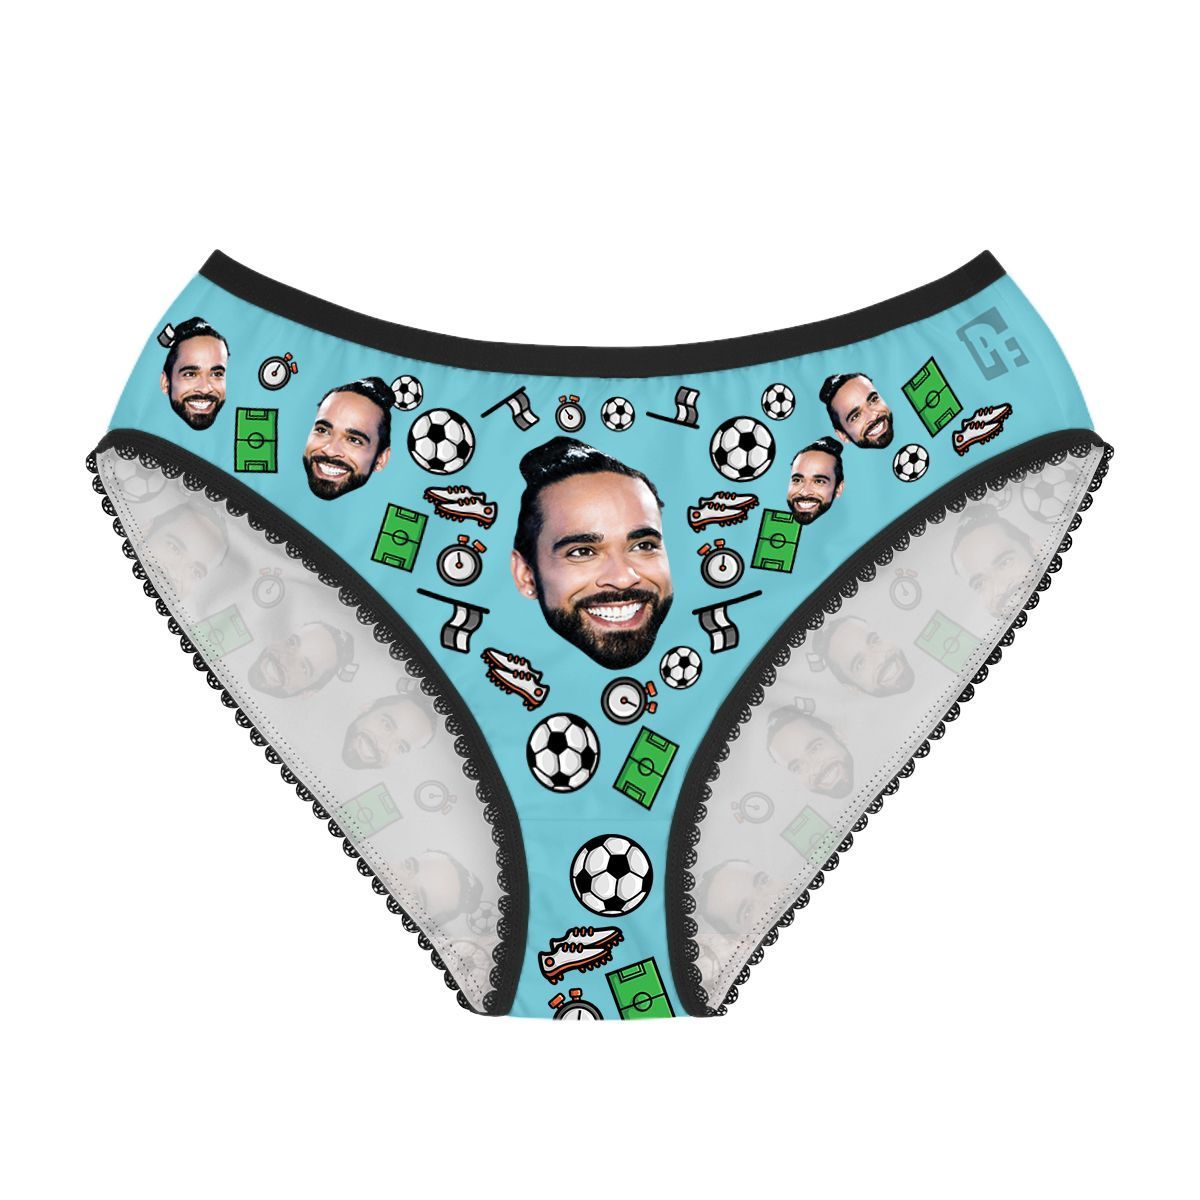 Blue Football women's underwear briefs personalized with photo printed on them